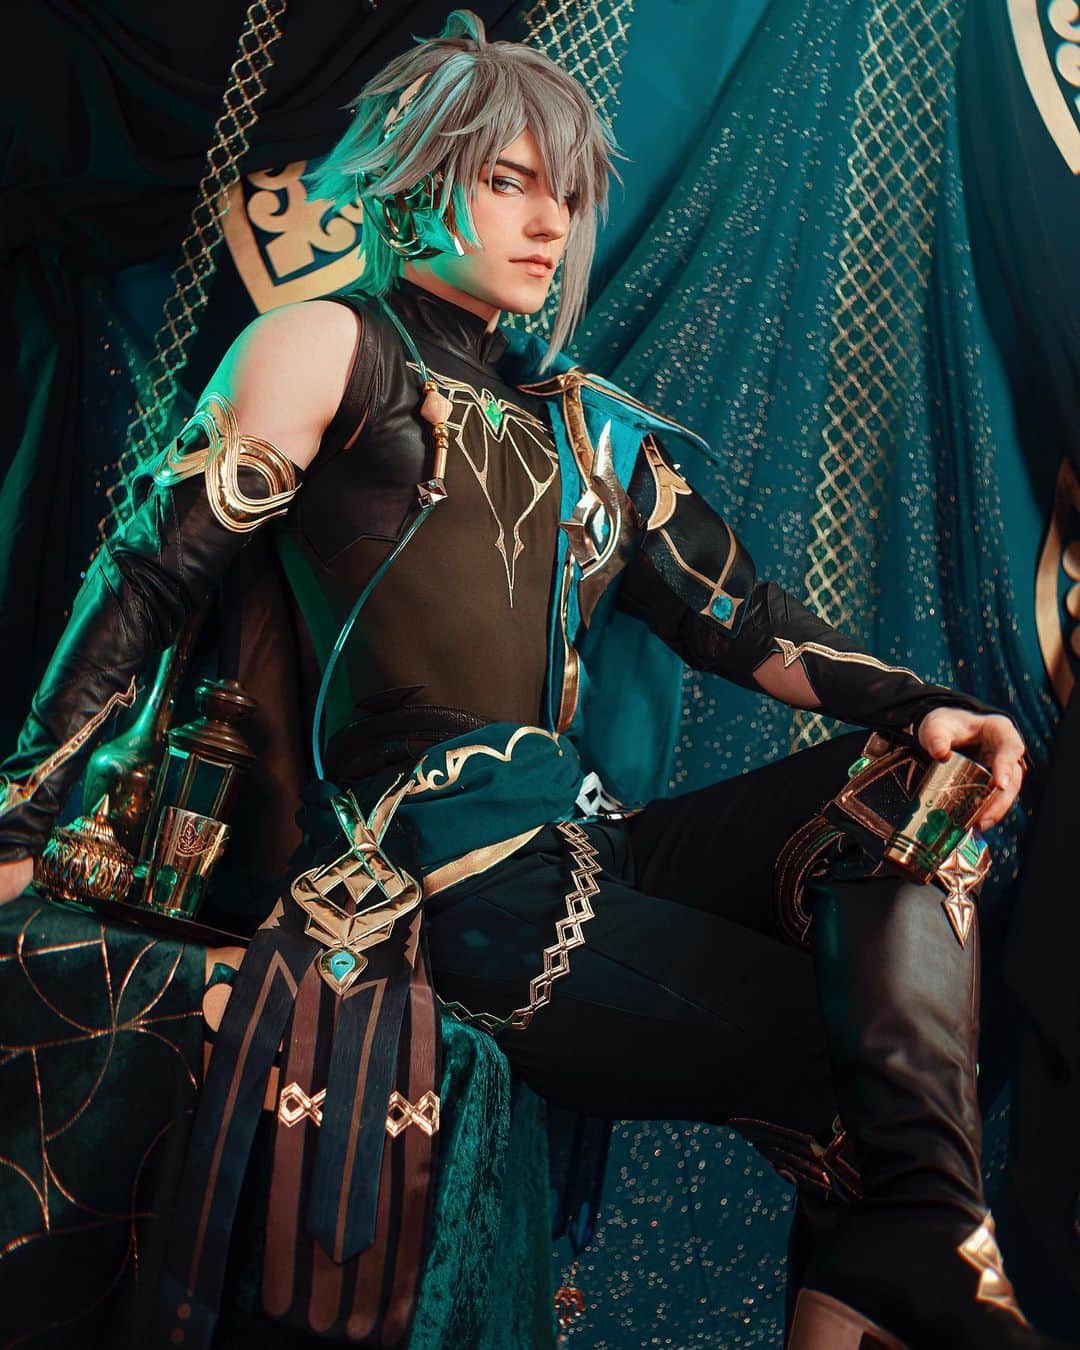 Geheのインスタグラム：「Alhaitham ended up being so much more comfortable to wear than I thought :o can't wait to wear him again and take more photos! But I have something else prepared for him in the meantime hehe, stay tuned! 8)  Photo by @pnkvirus  Cosplay and wig from @dokidokicosplay_official  #alhaitham #cosplay #genshinimpactcosplay #cosplayphotography #alhaithamcosplay」